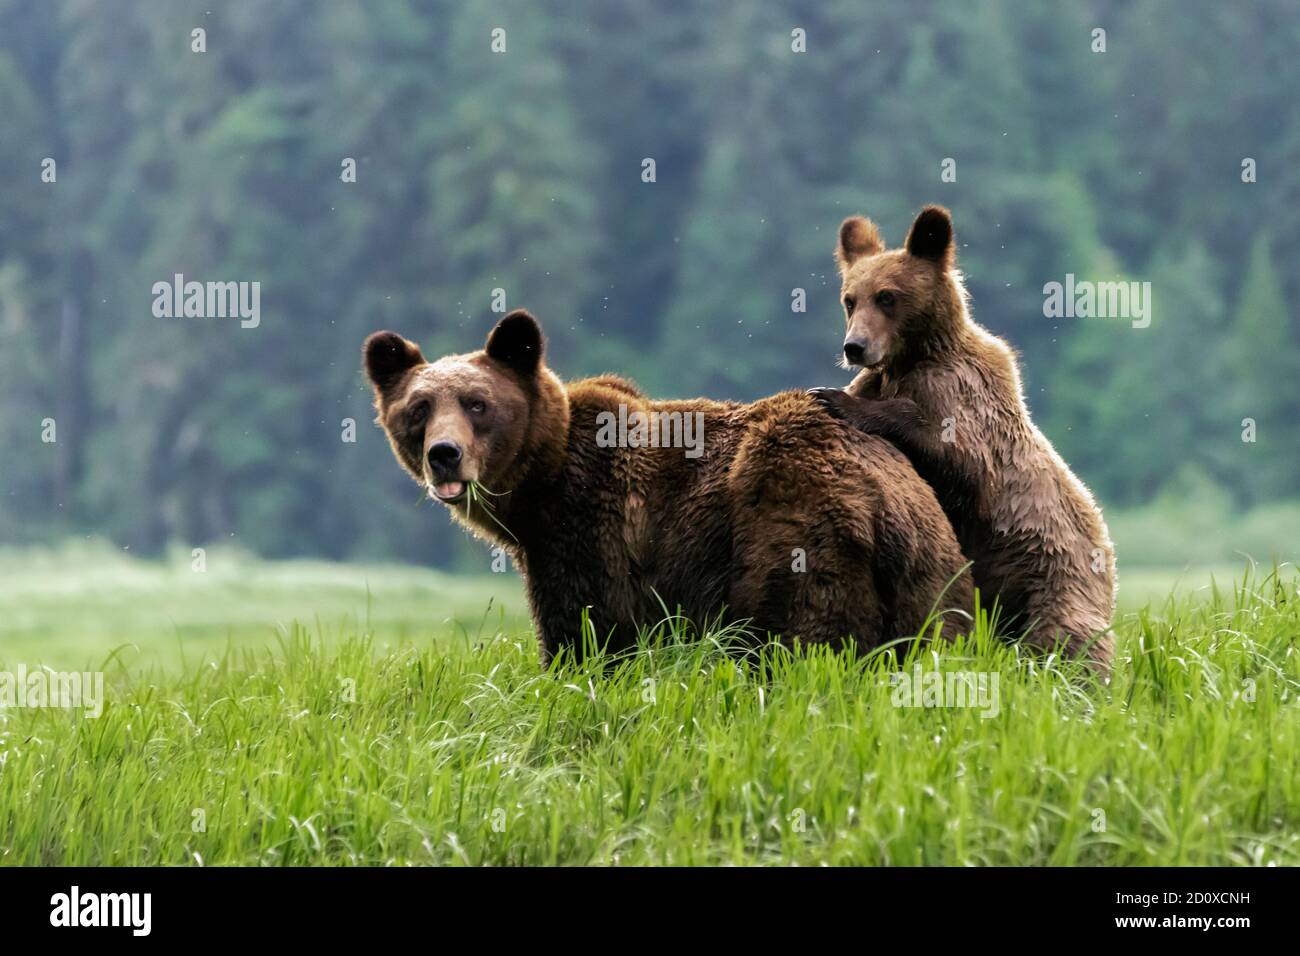 Mother grizzly and cub checking out the photographer, Khutzeymateen Inlet, BC Stock Photo